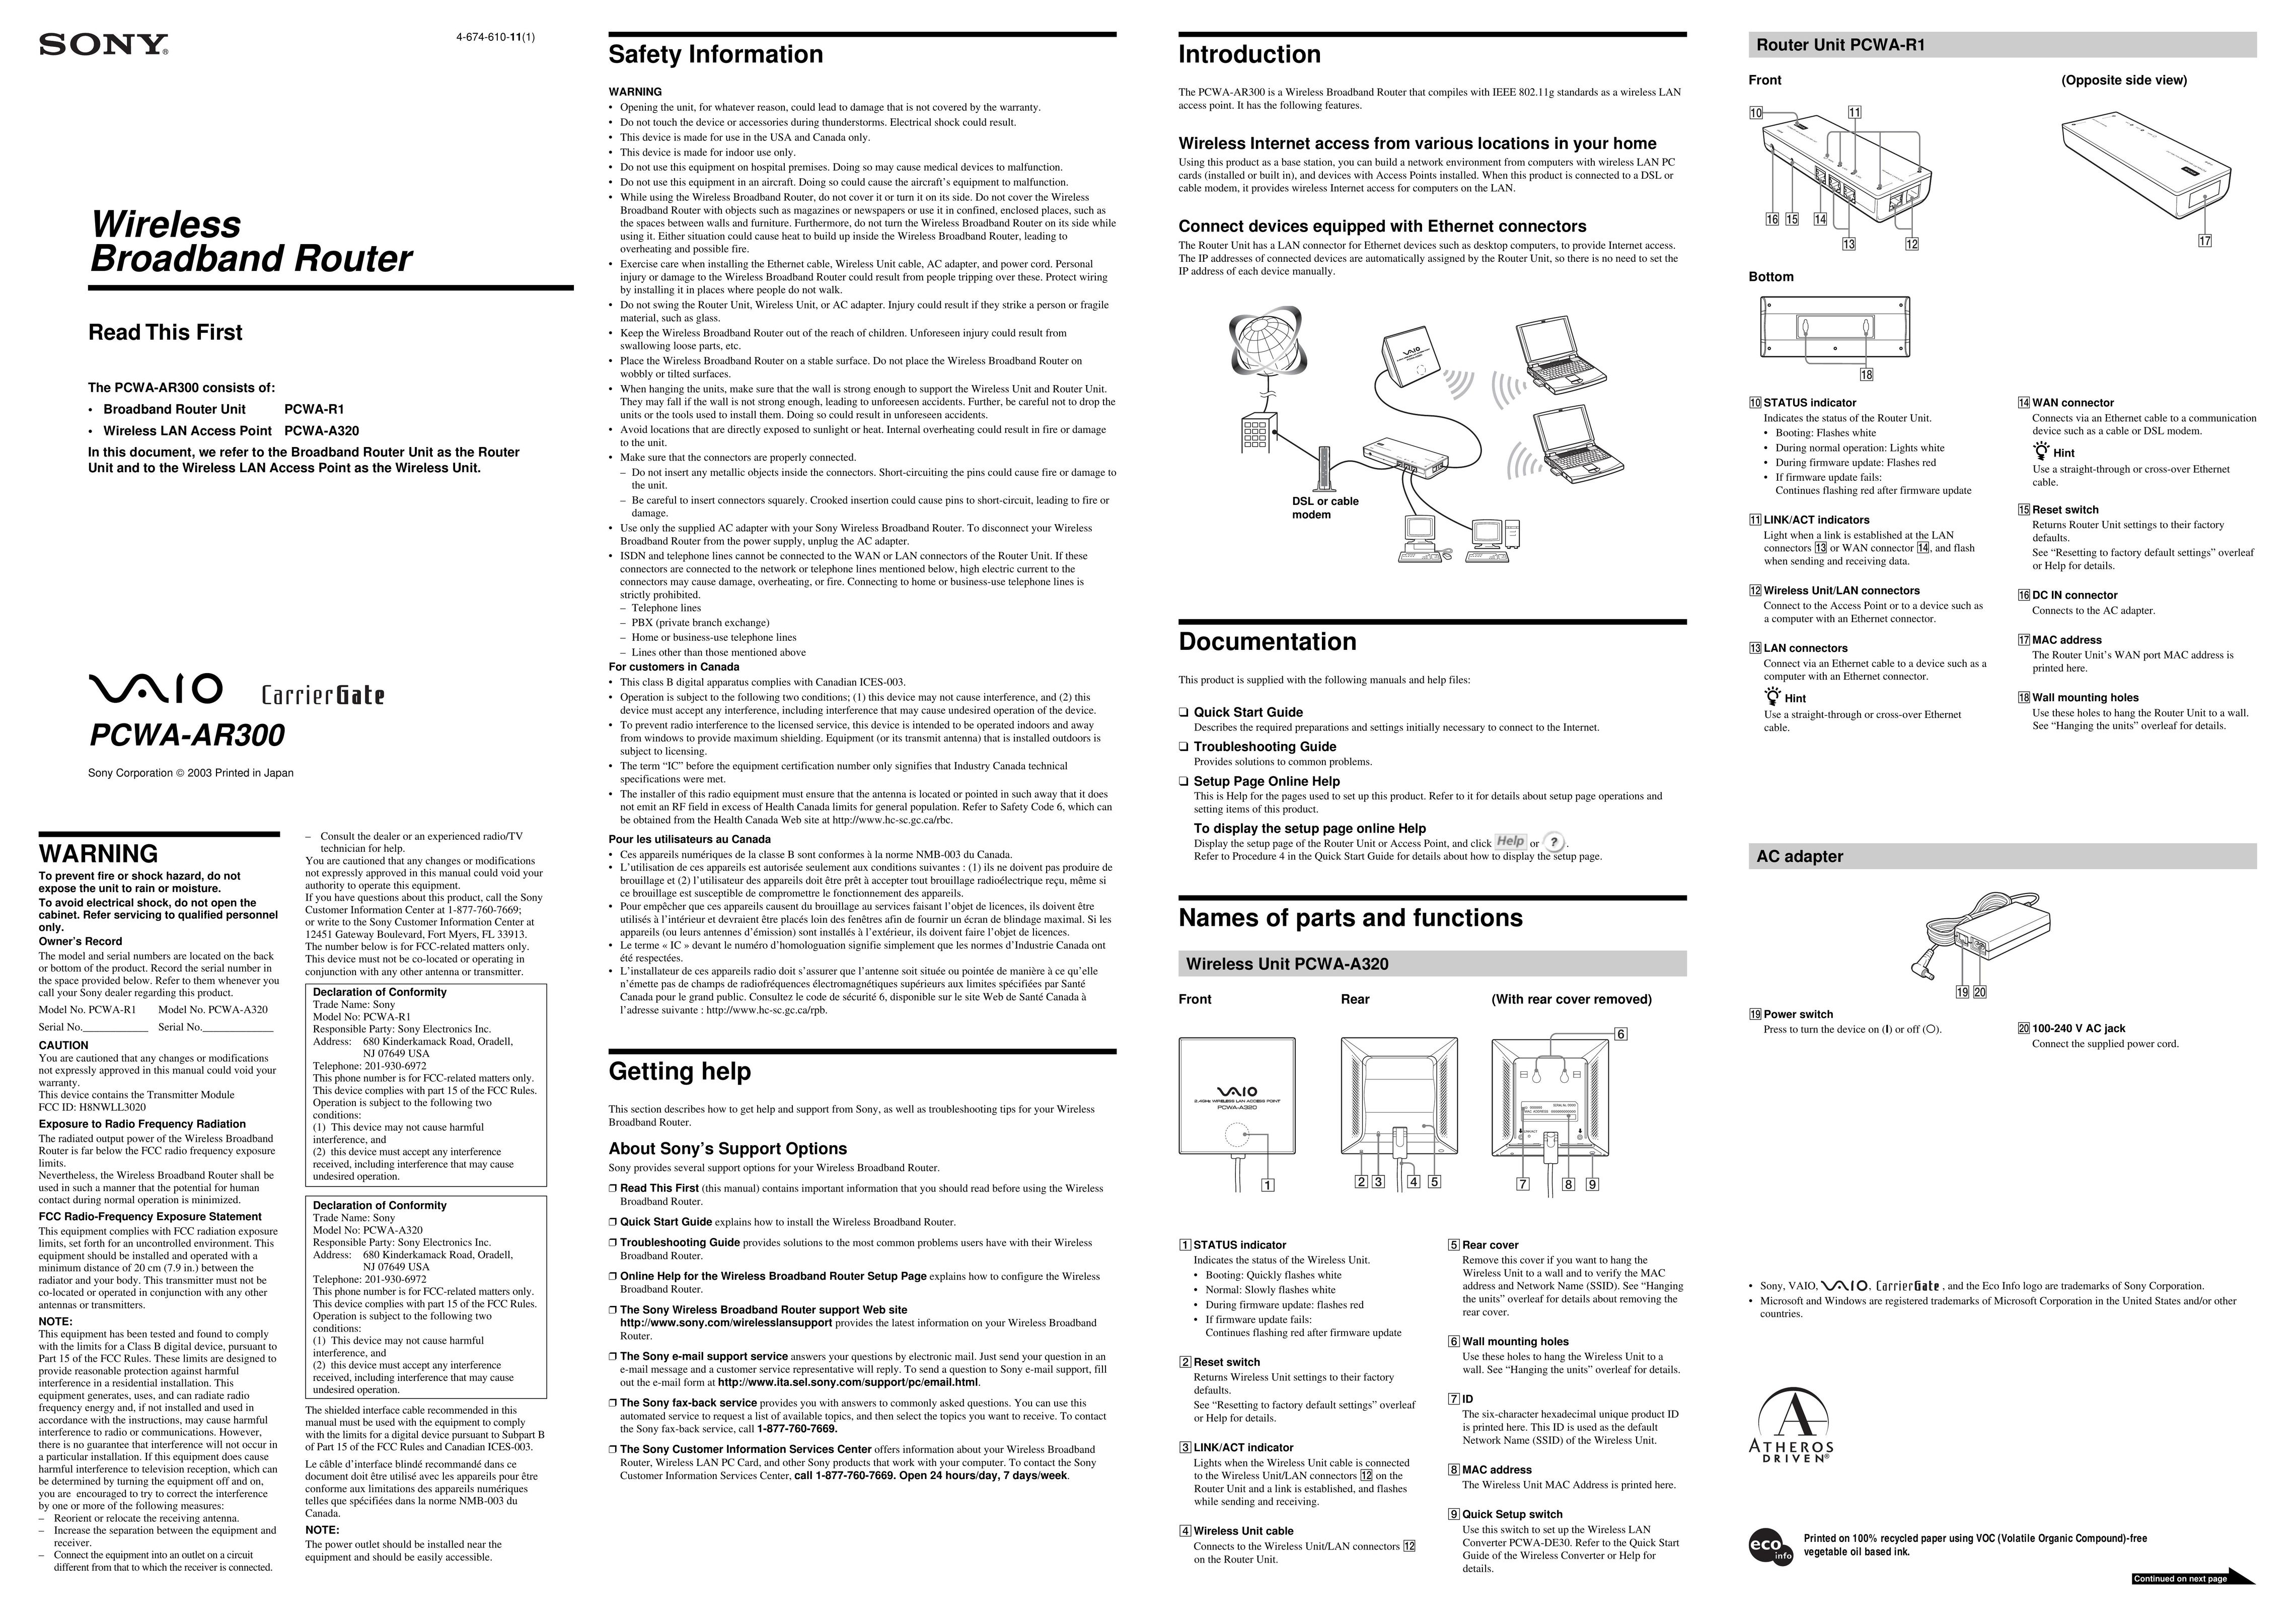 Sony PCWA-AR300 Network Router User Manual